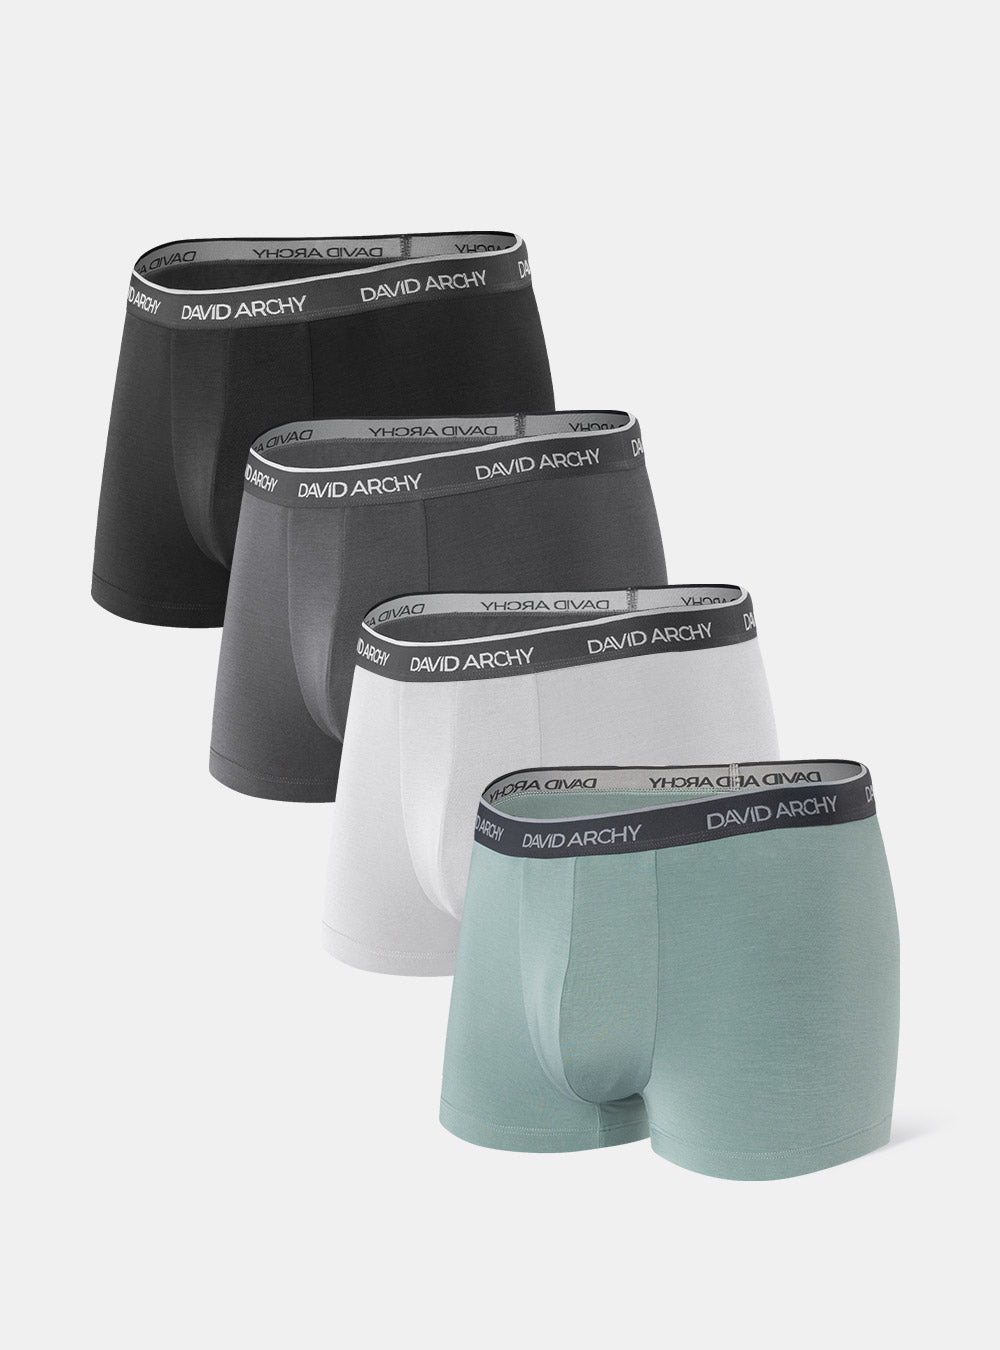 4 Packs Bamboo Rayon 3D Touch Trunks